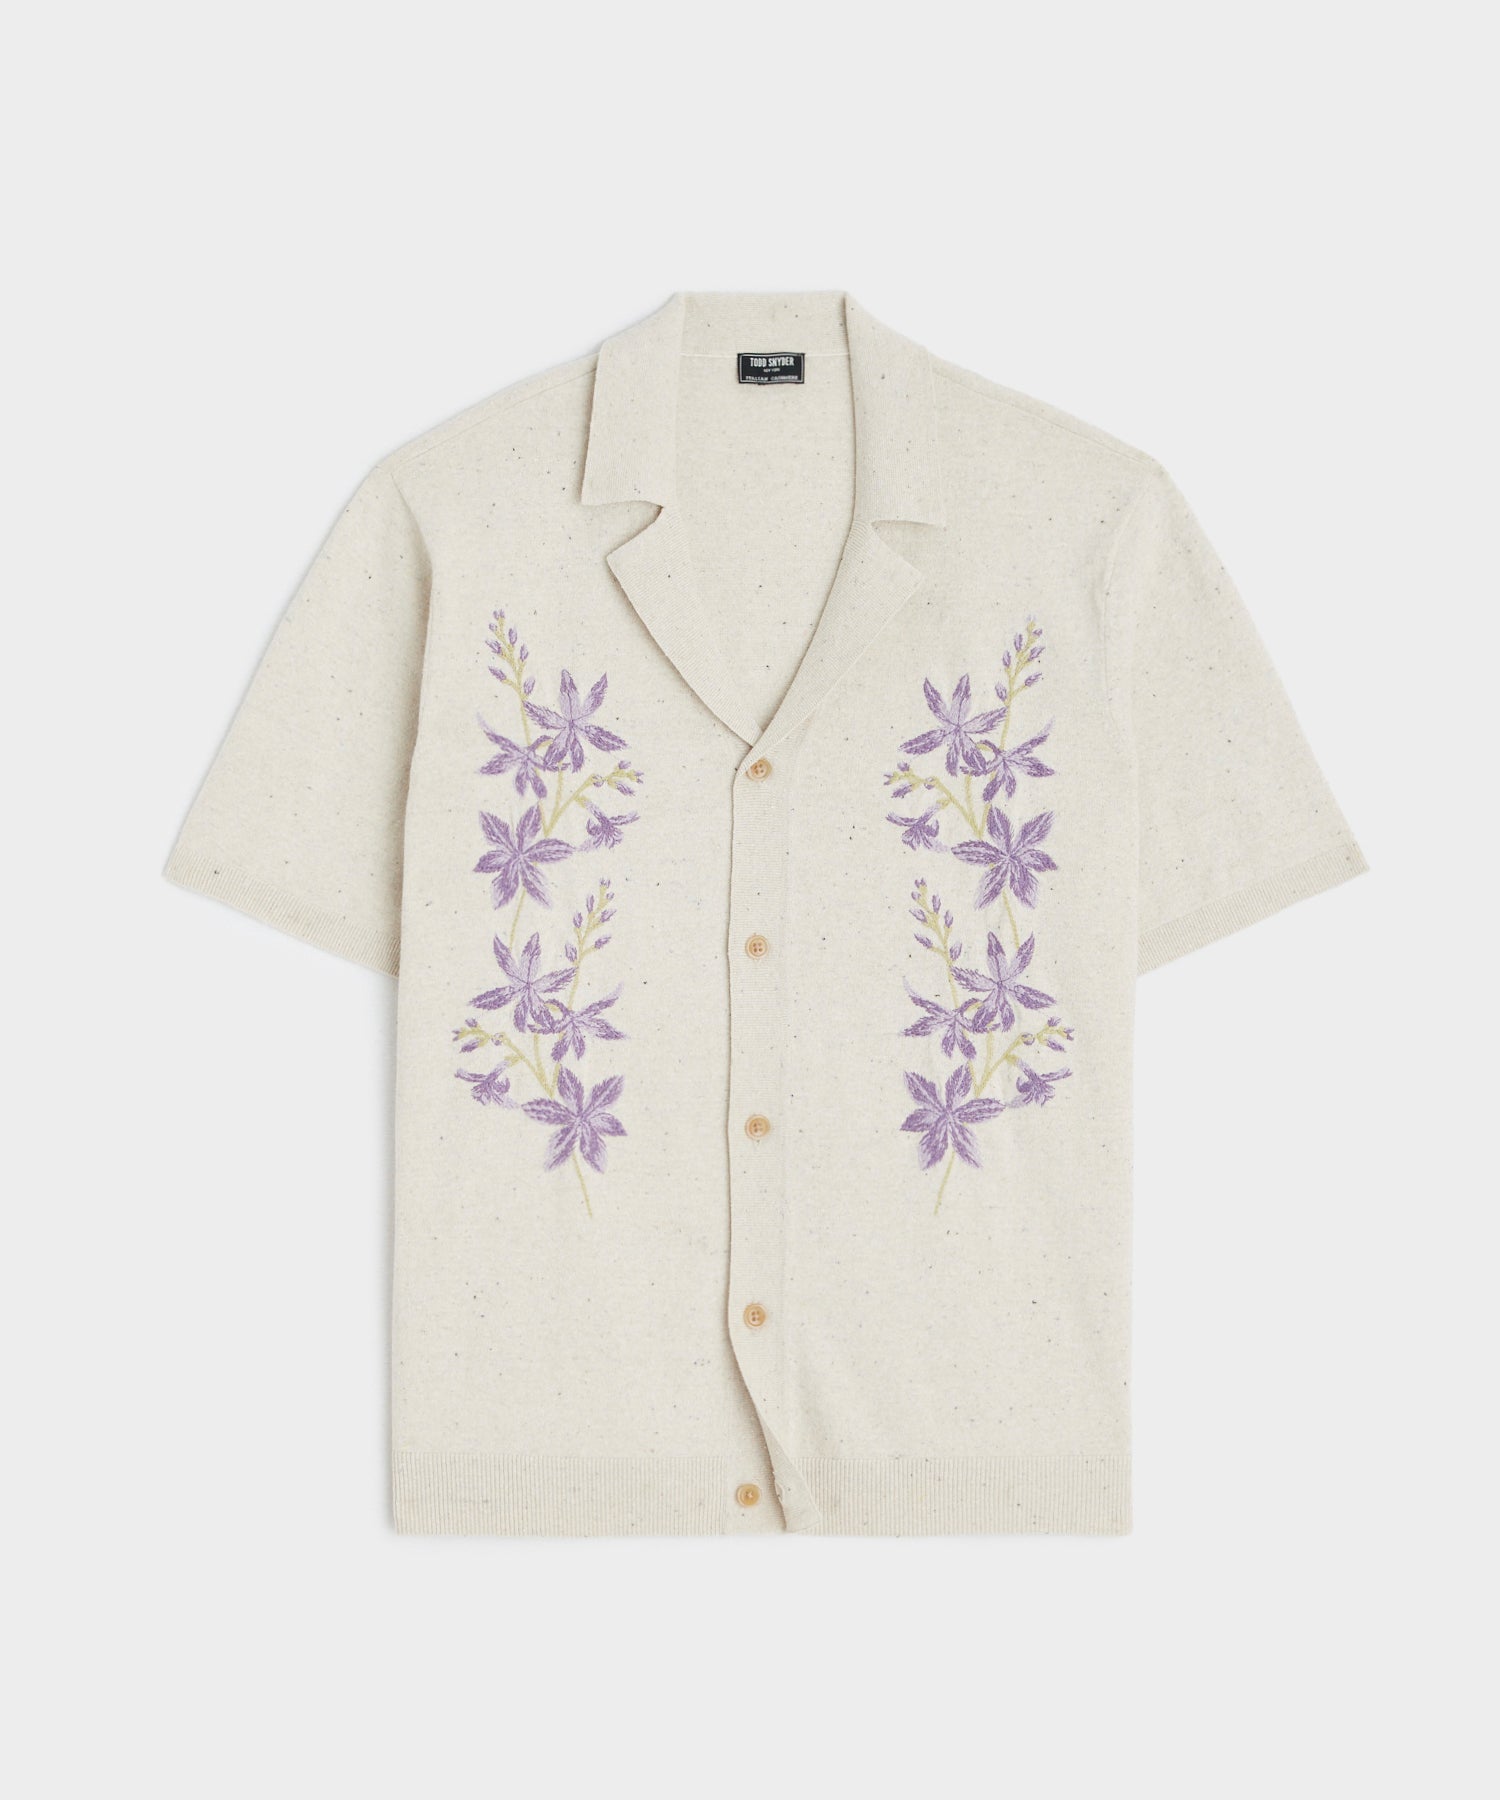 Floral Full-Placket Polo in Dusty Lavender